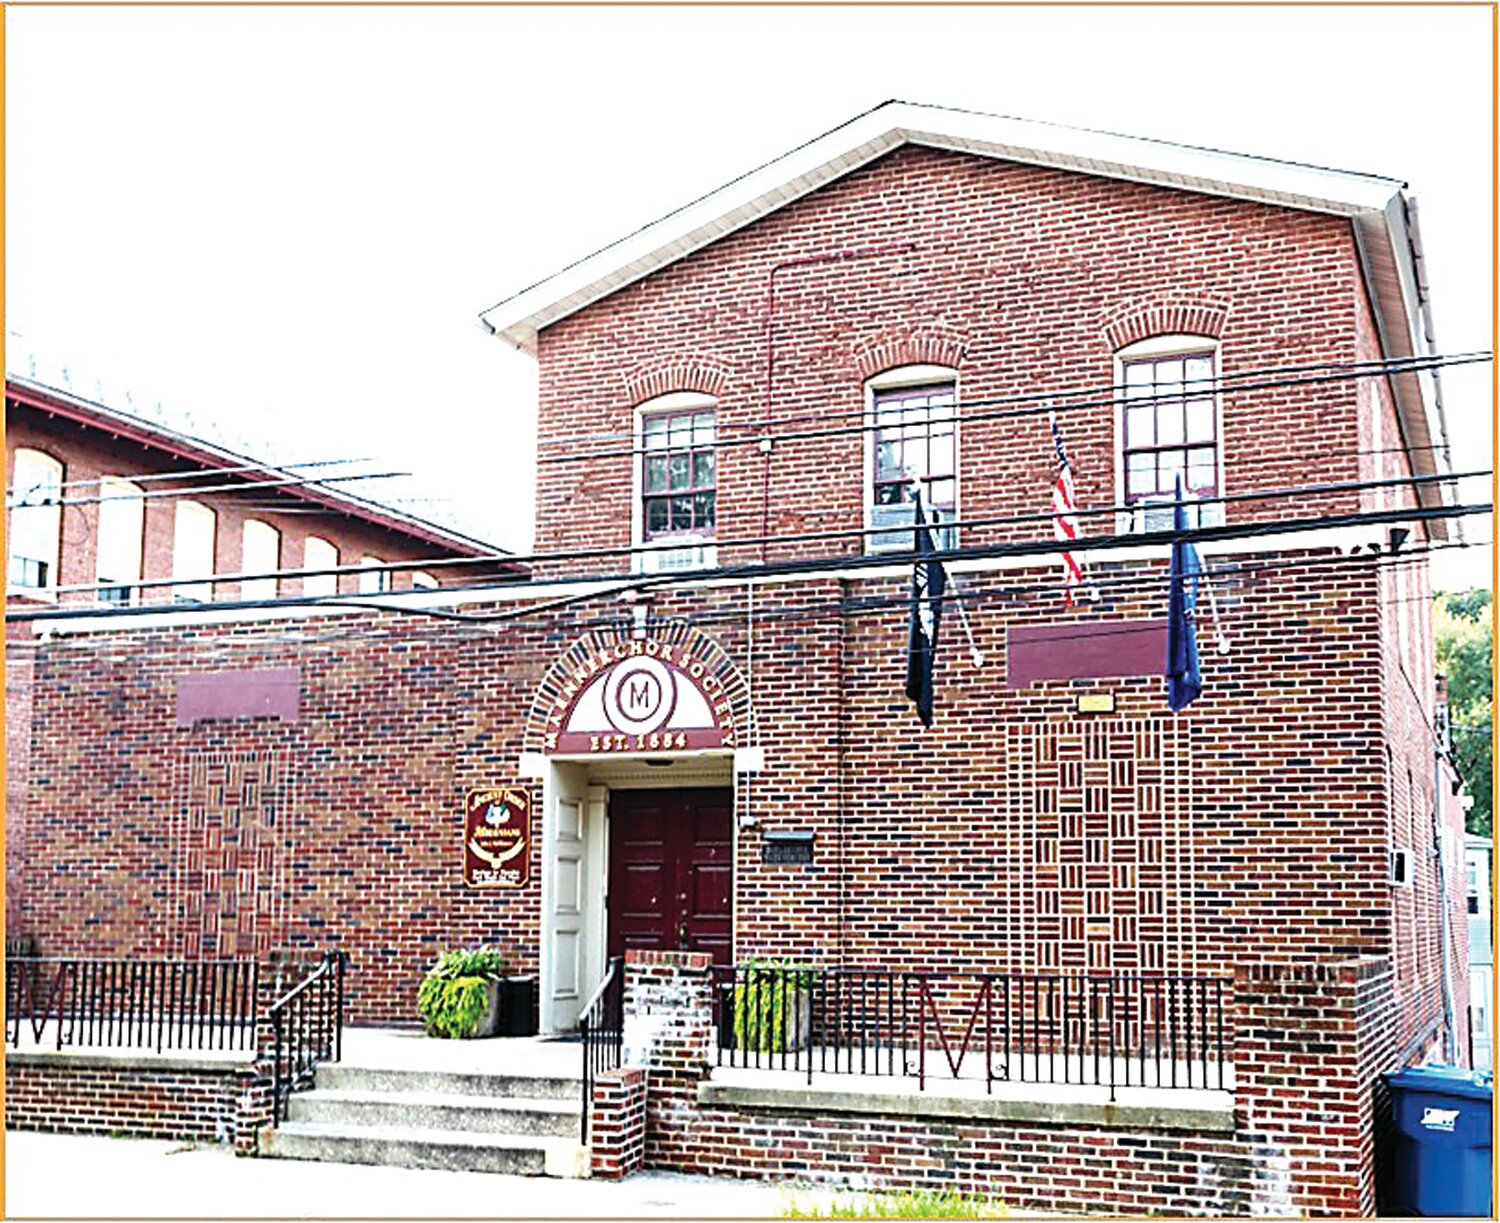 The Doylestown Maennerchor Society continues as one of the oldest independent, private, social clubs in Doylestown. The bar serves food and drink at 40 E. Oakland Ave.